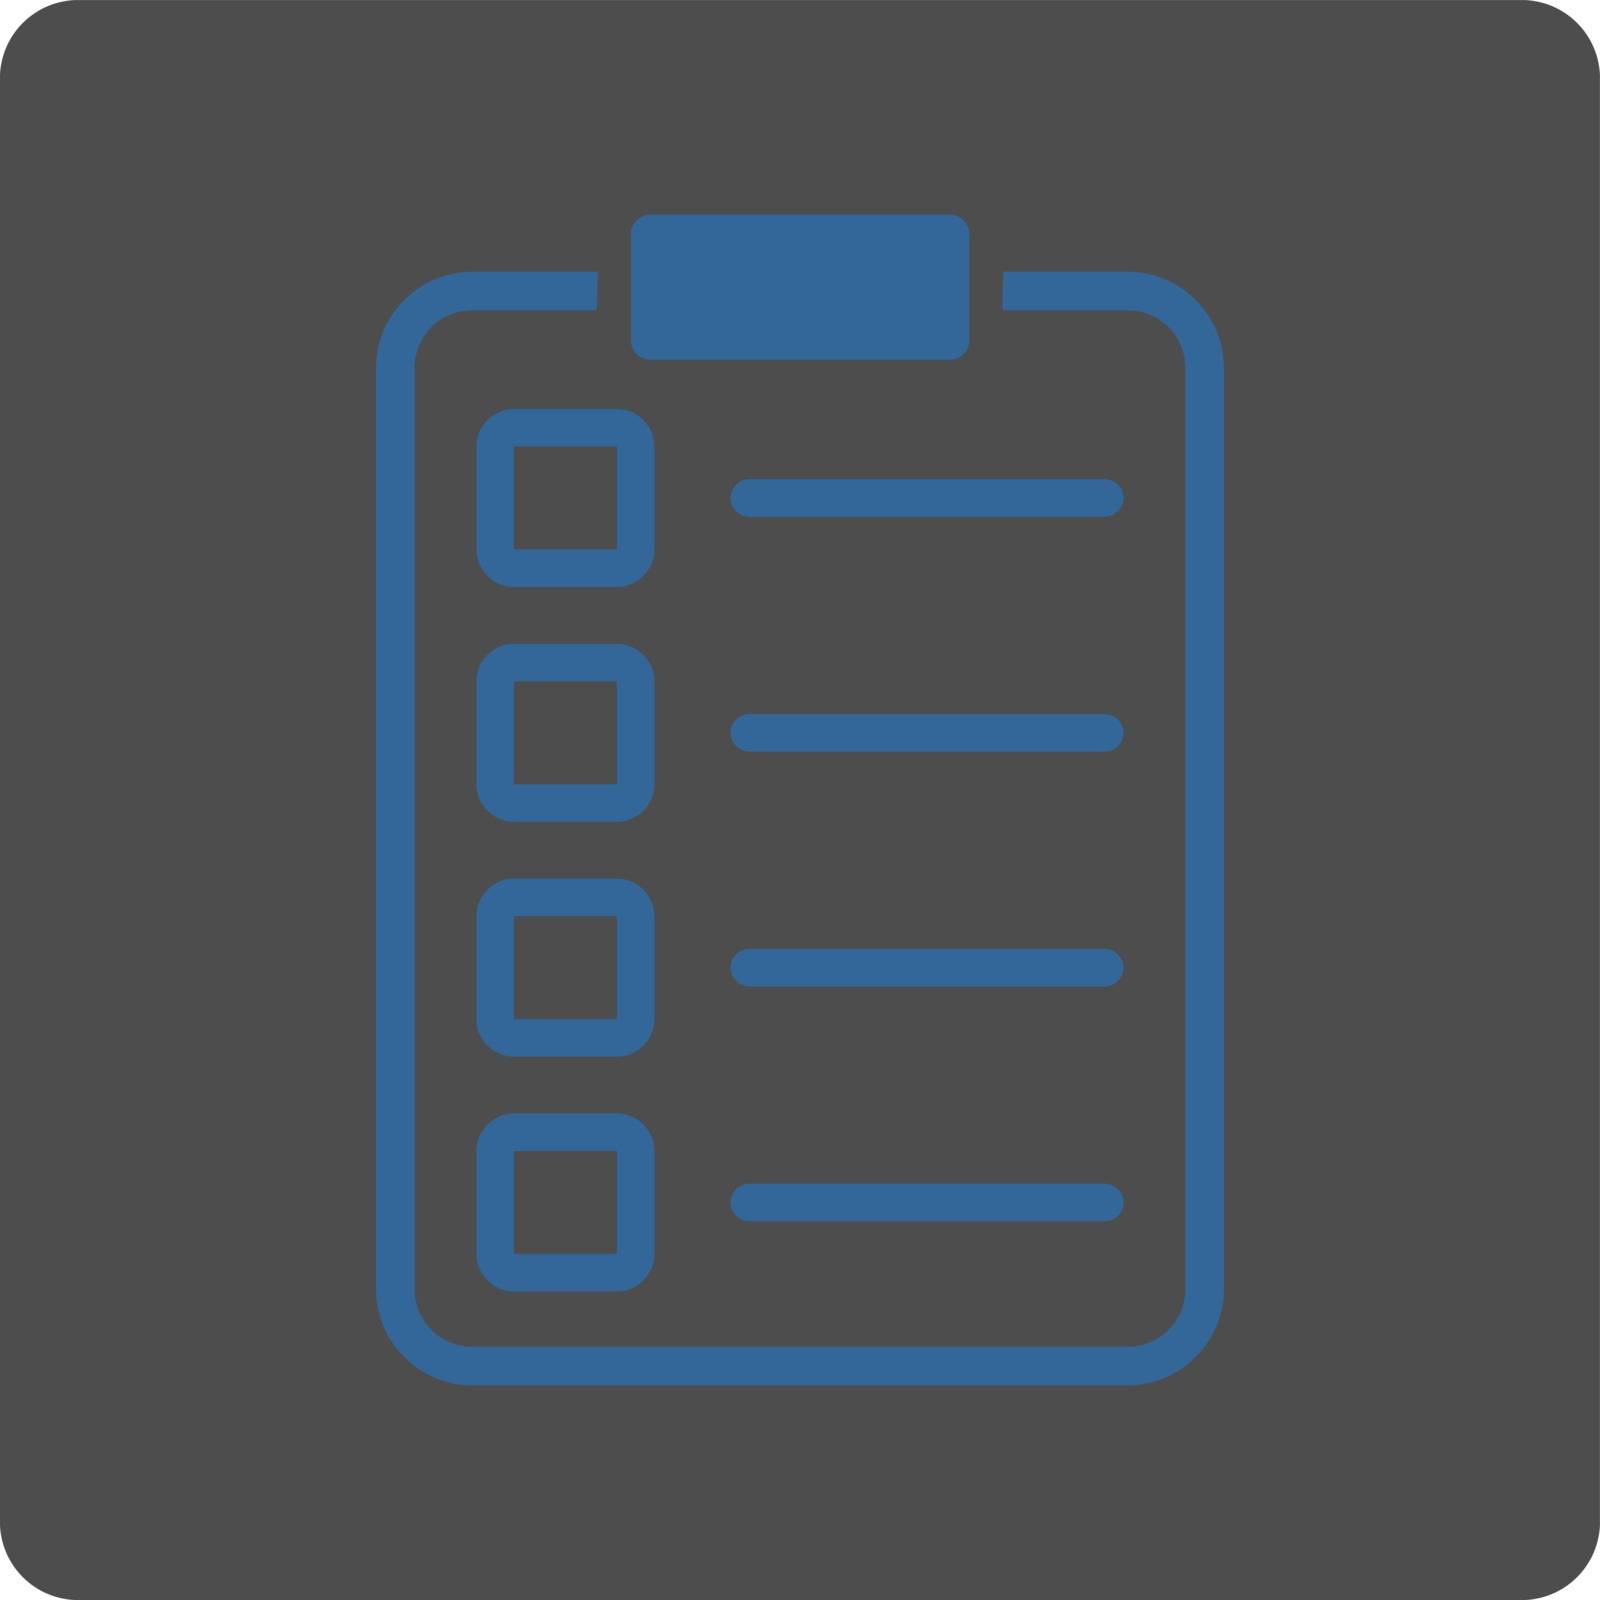 Examination icon. Vector style is cobalt and gray colors, flat rounded square button on a white background.